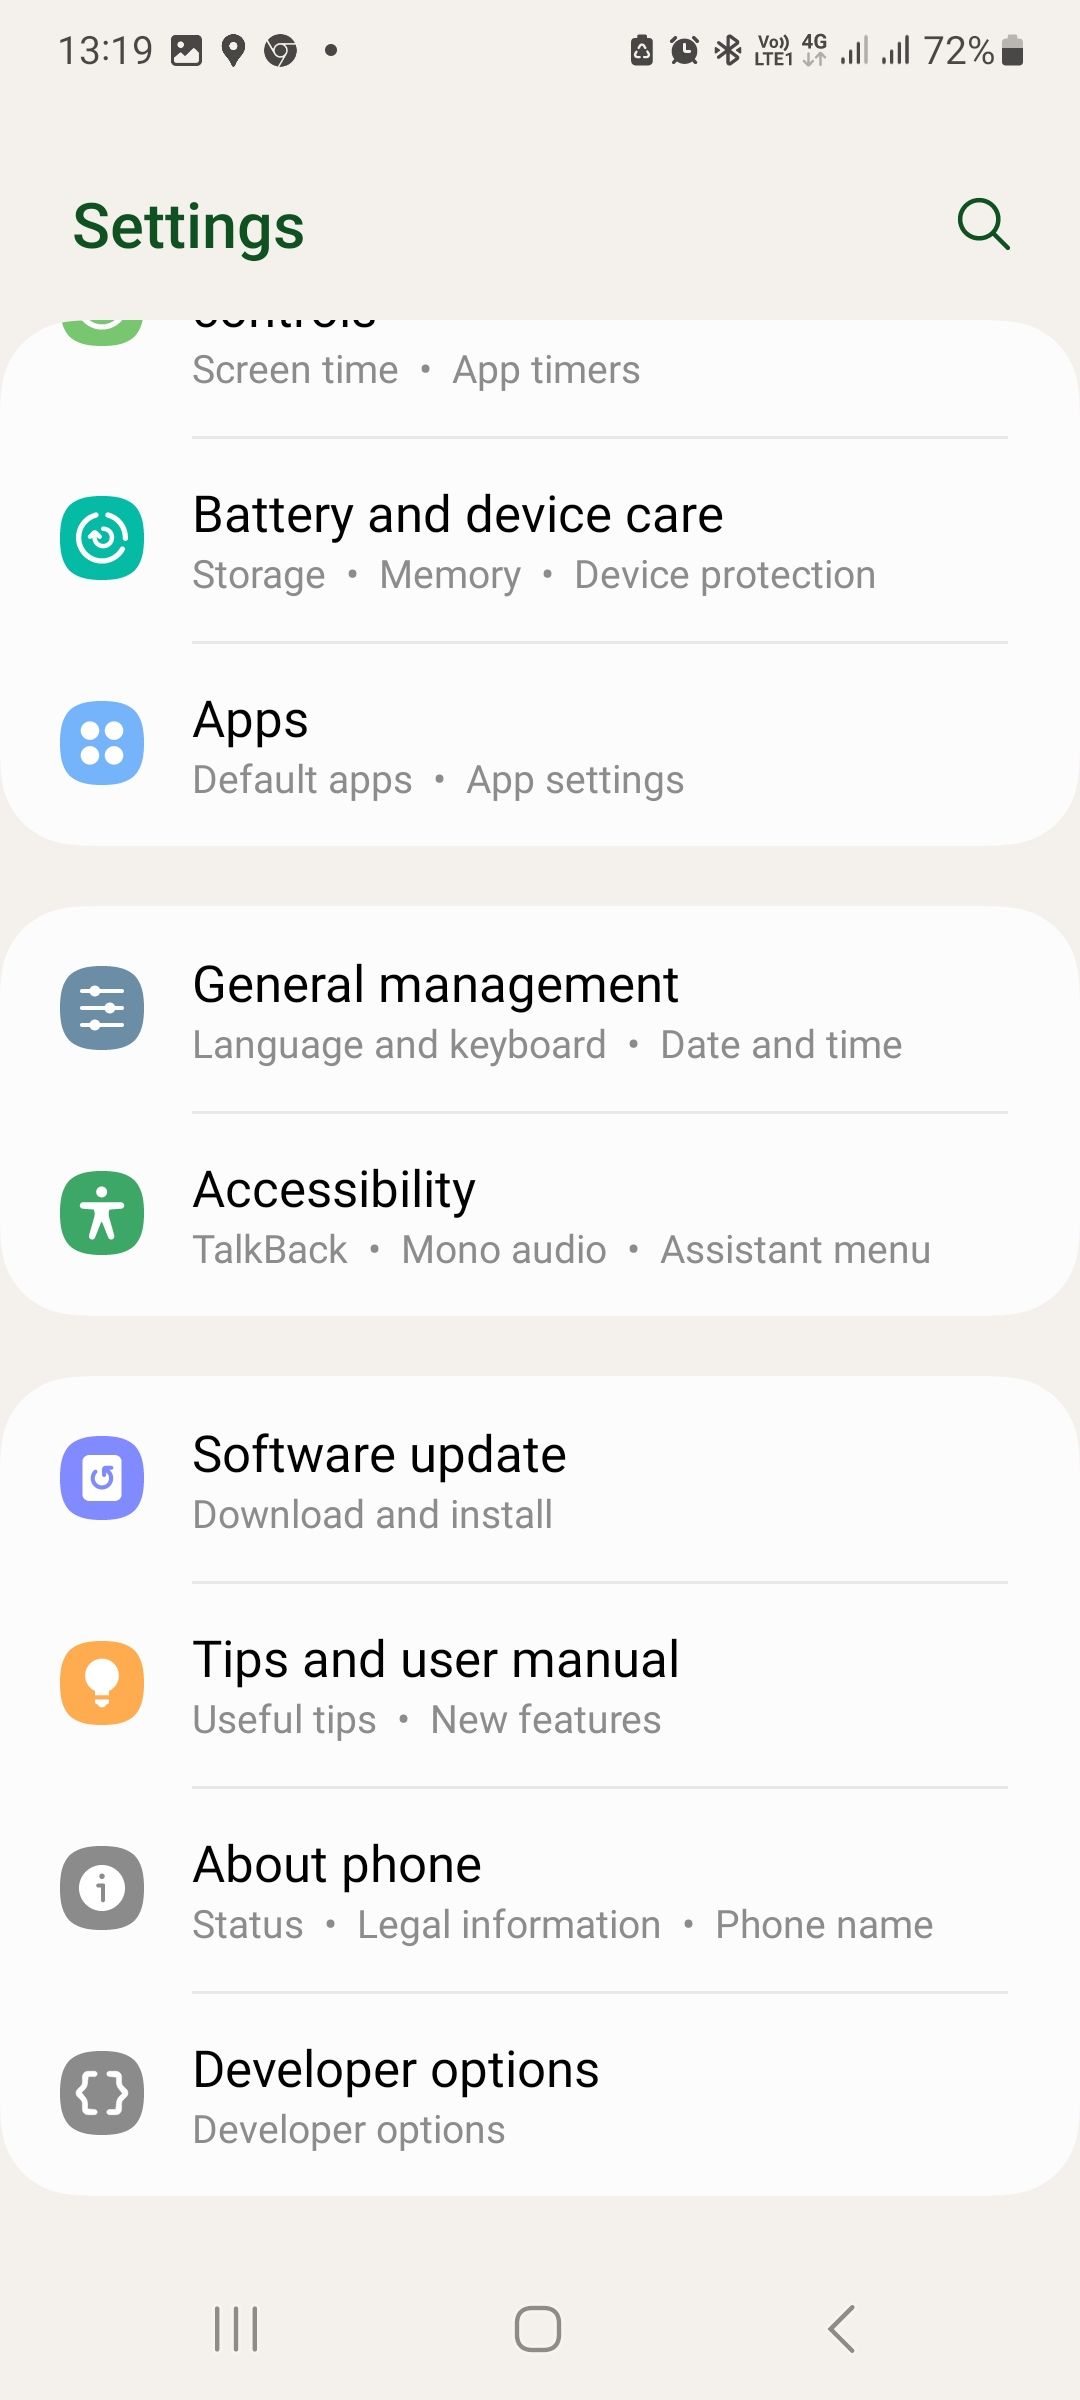 The settings menu on Android phone